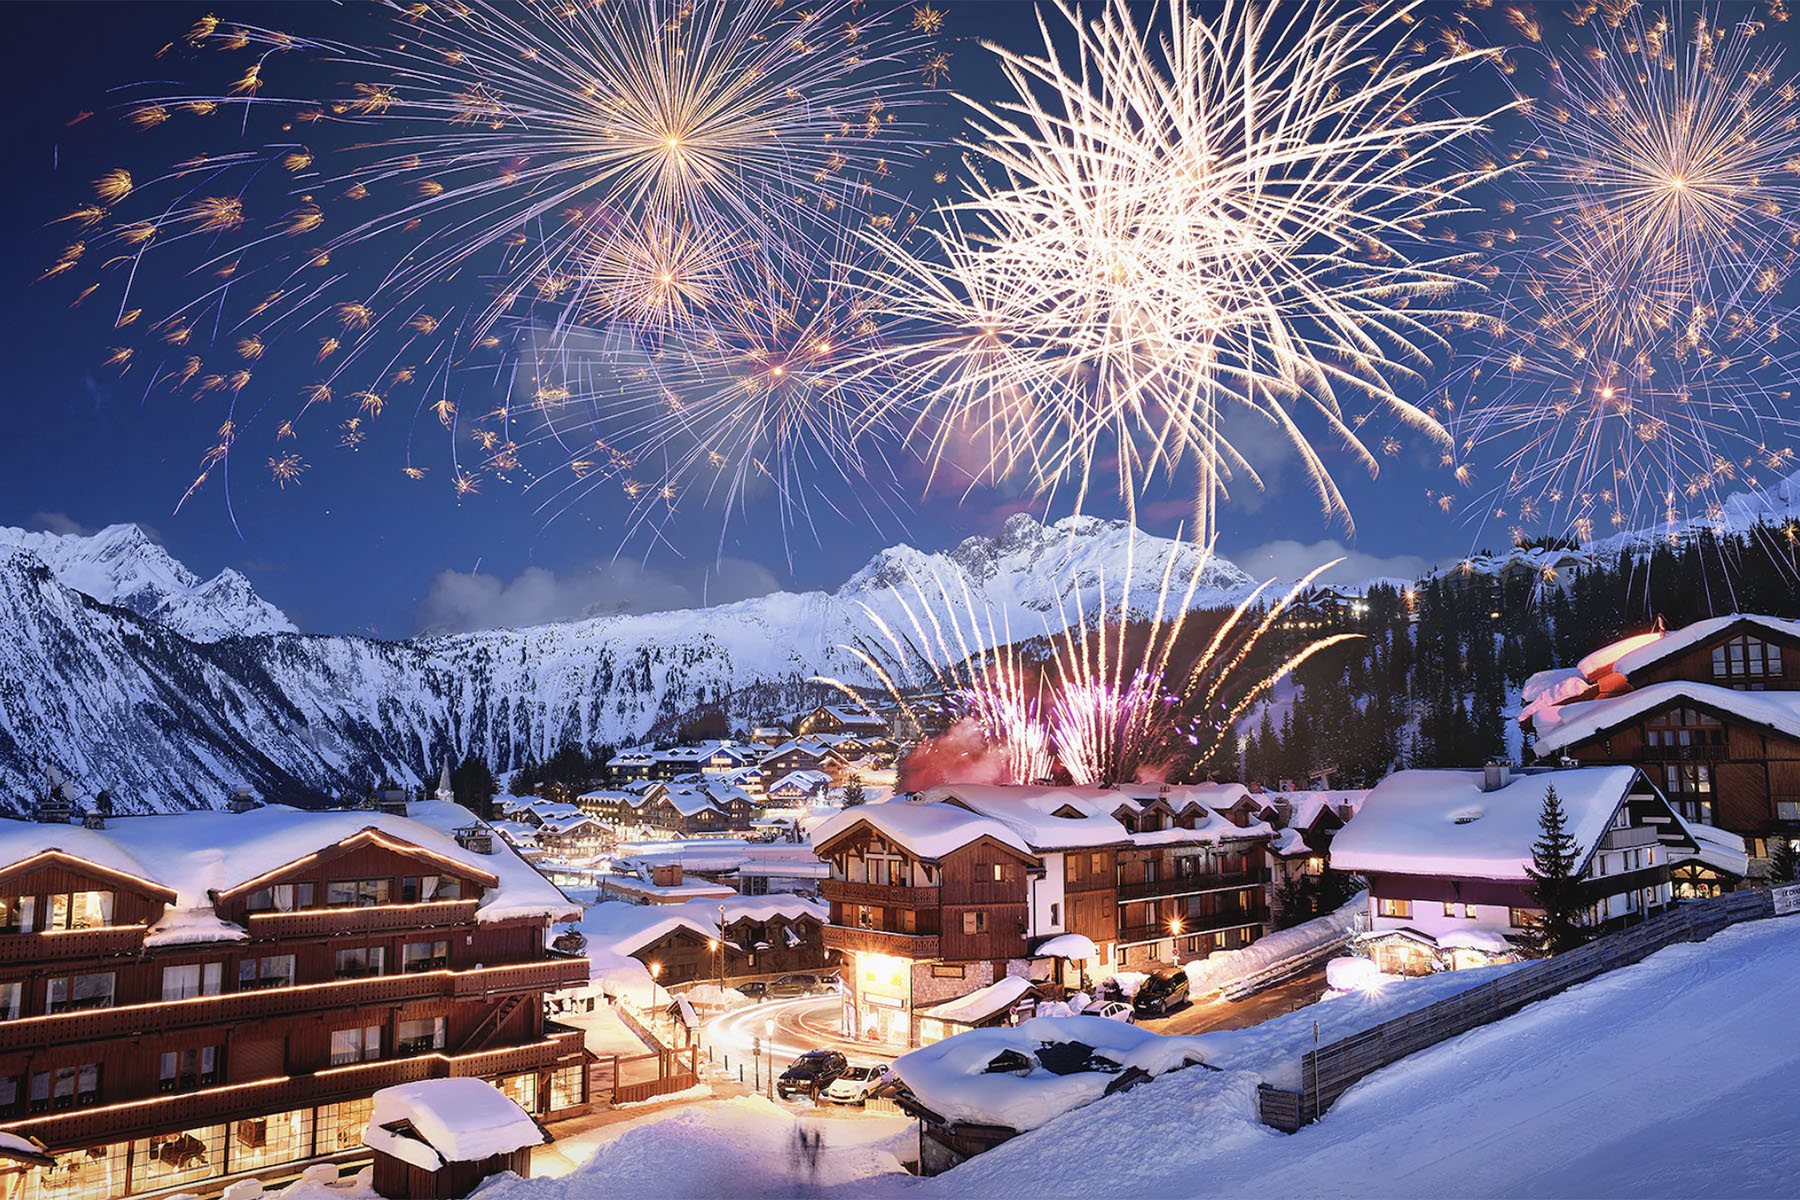 8 luxury ski resorts you’ll wish you could spend the year-end holidays at